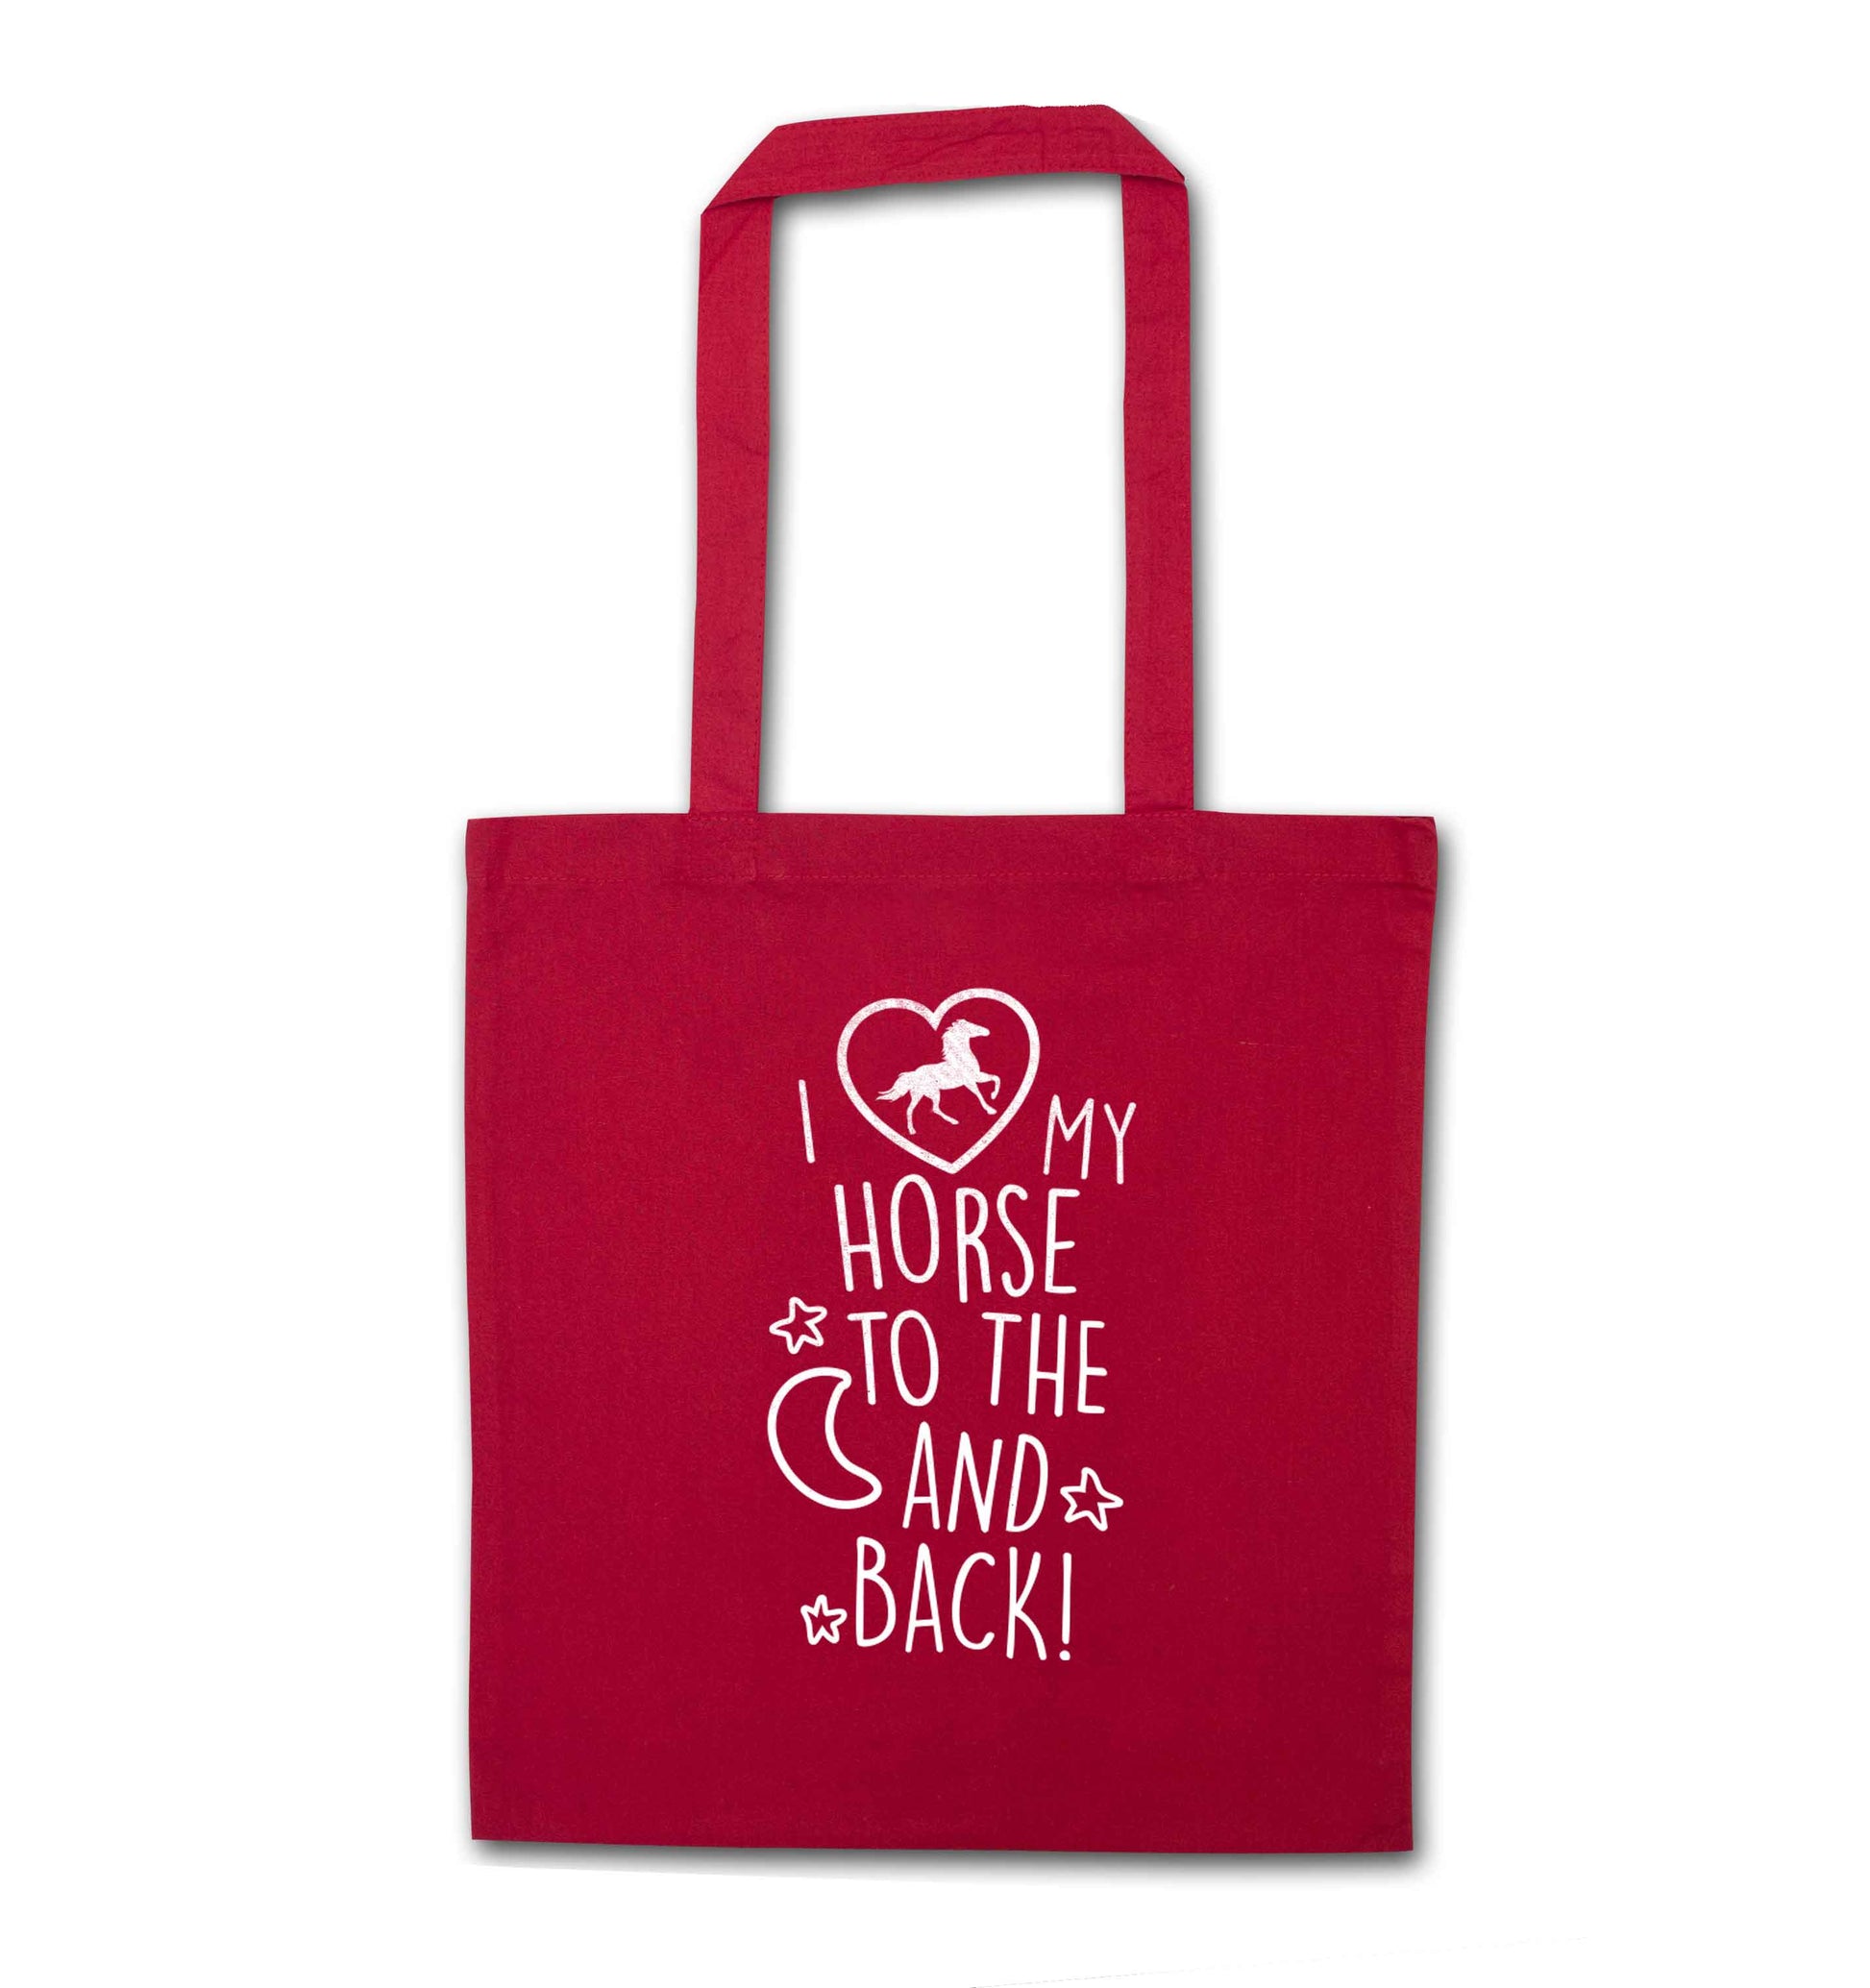 I love my horse to the moon and back red tote bag